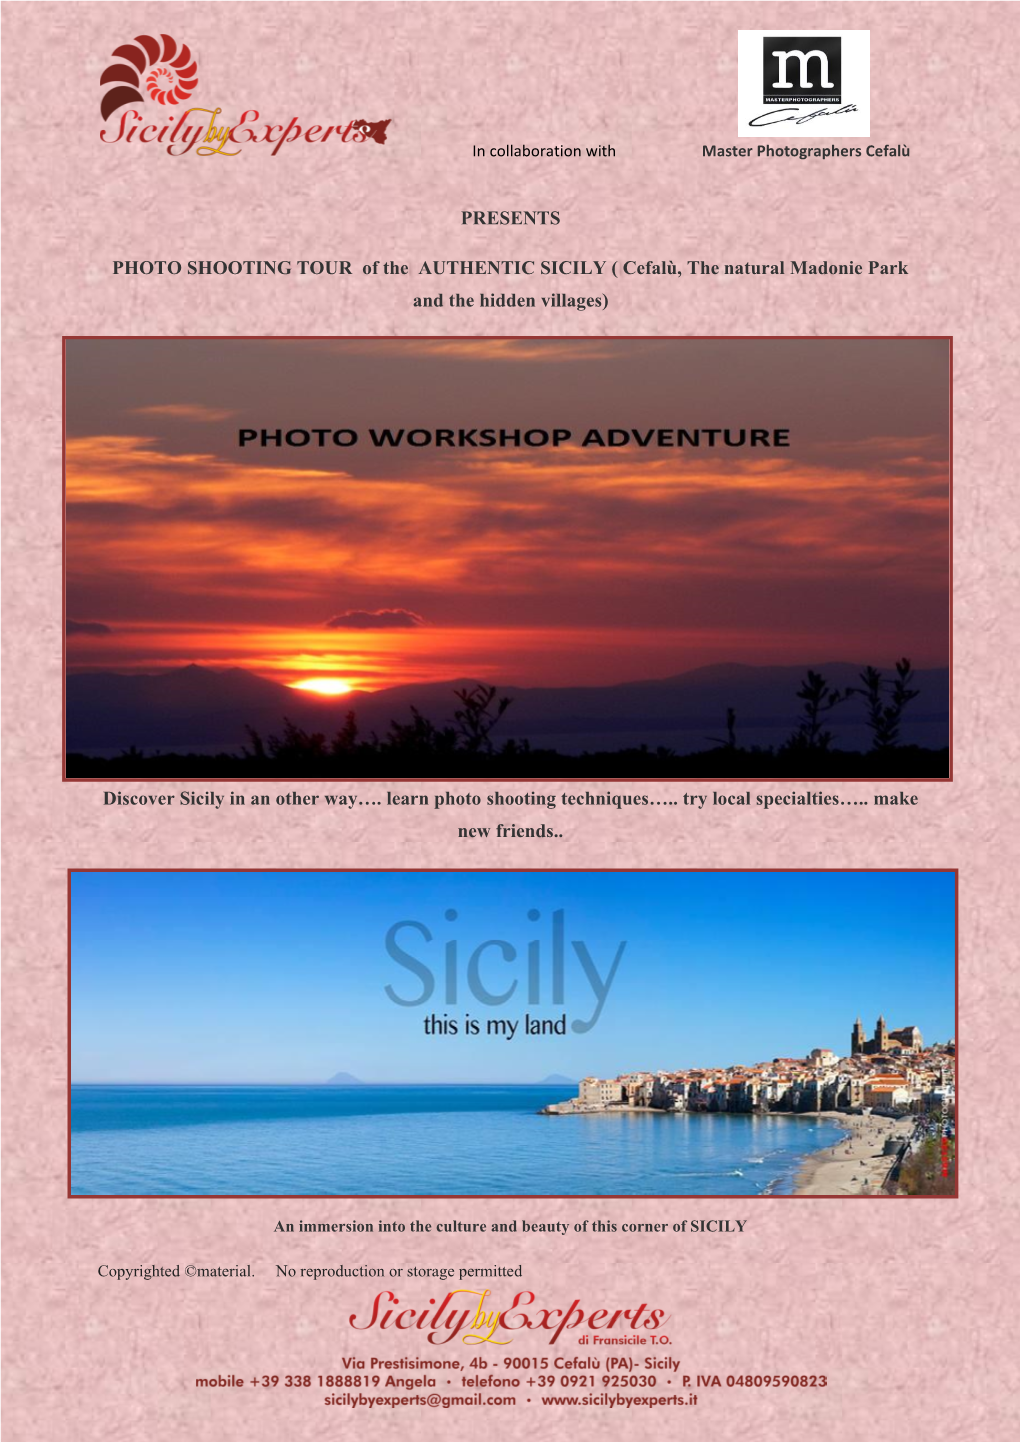 PRESENTS PHOTO SHOOTING TOUR of the AUTHENTIC SICILY ( Cefalù, the Natural Madonie Park and the Hidden Villages) Discover